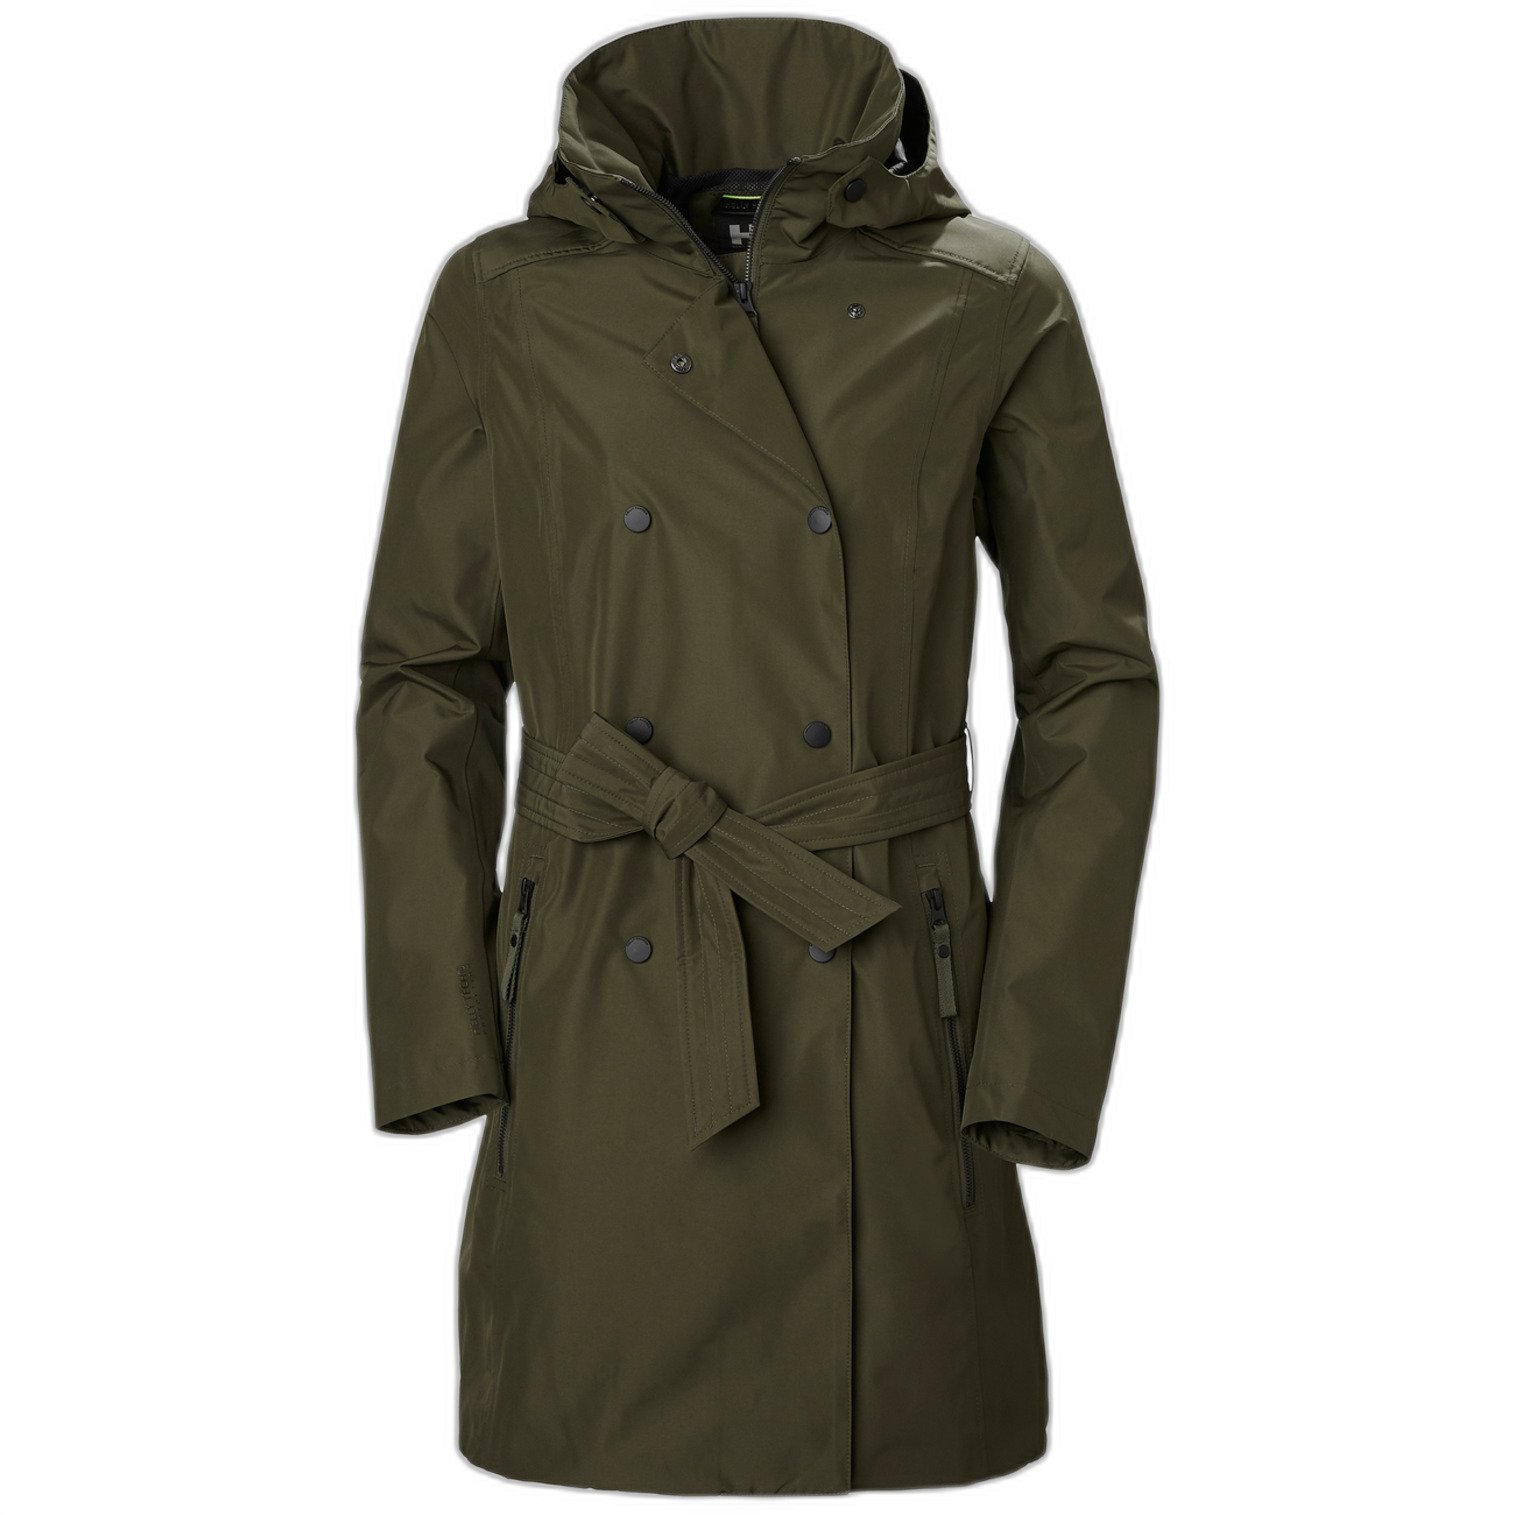 Abrigo Helly Hansen mujer multicolor l welsey ii waterproof rain trench coat with hood impermeable transpirable